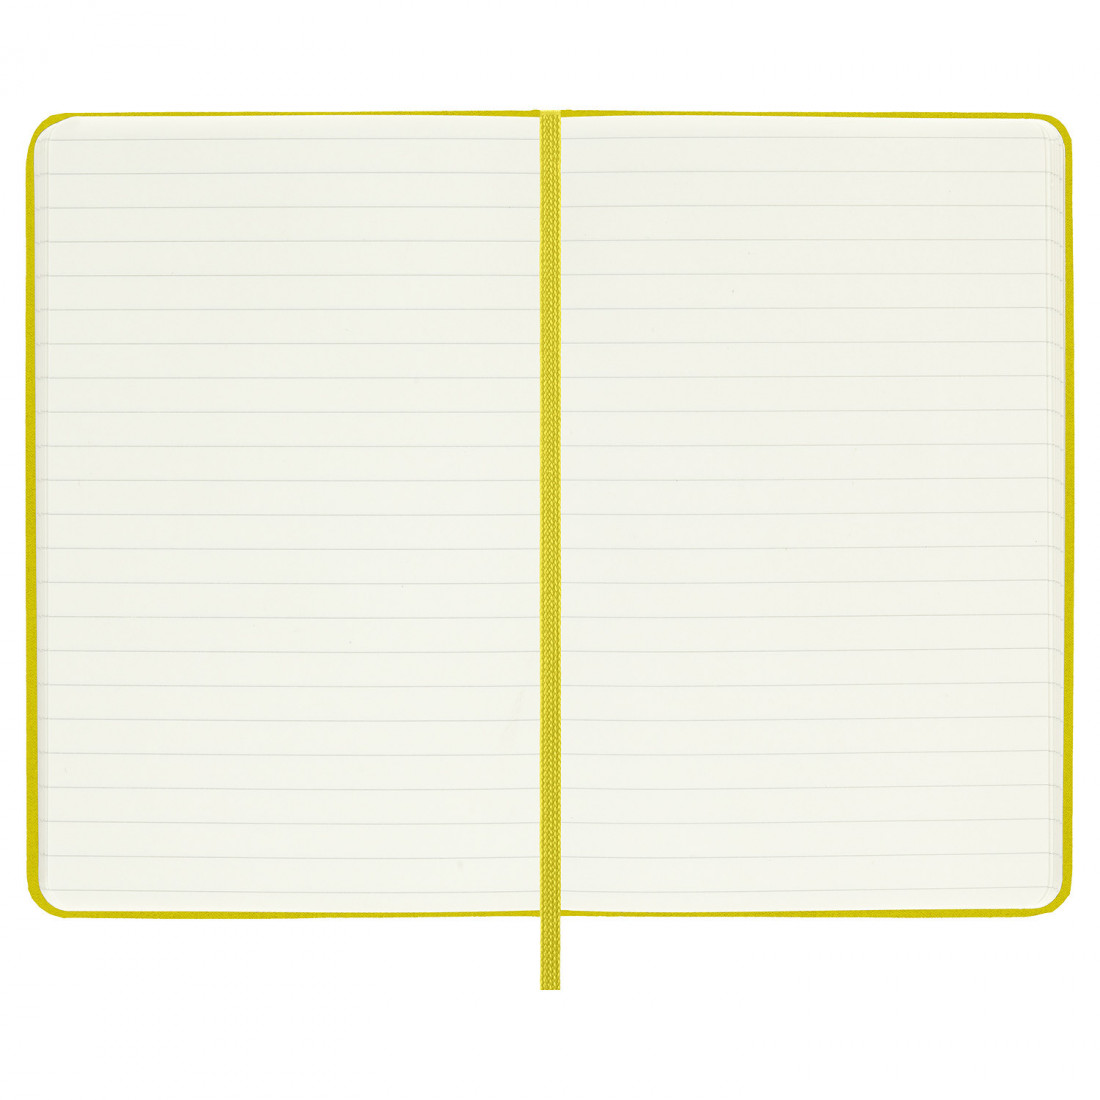 Notebook Large 13x21 Silk Hay Yellow Ruled Hard Cover Moleskine